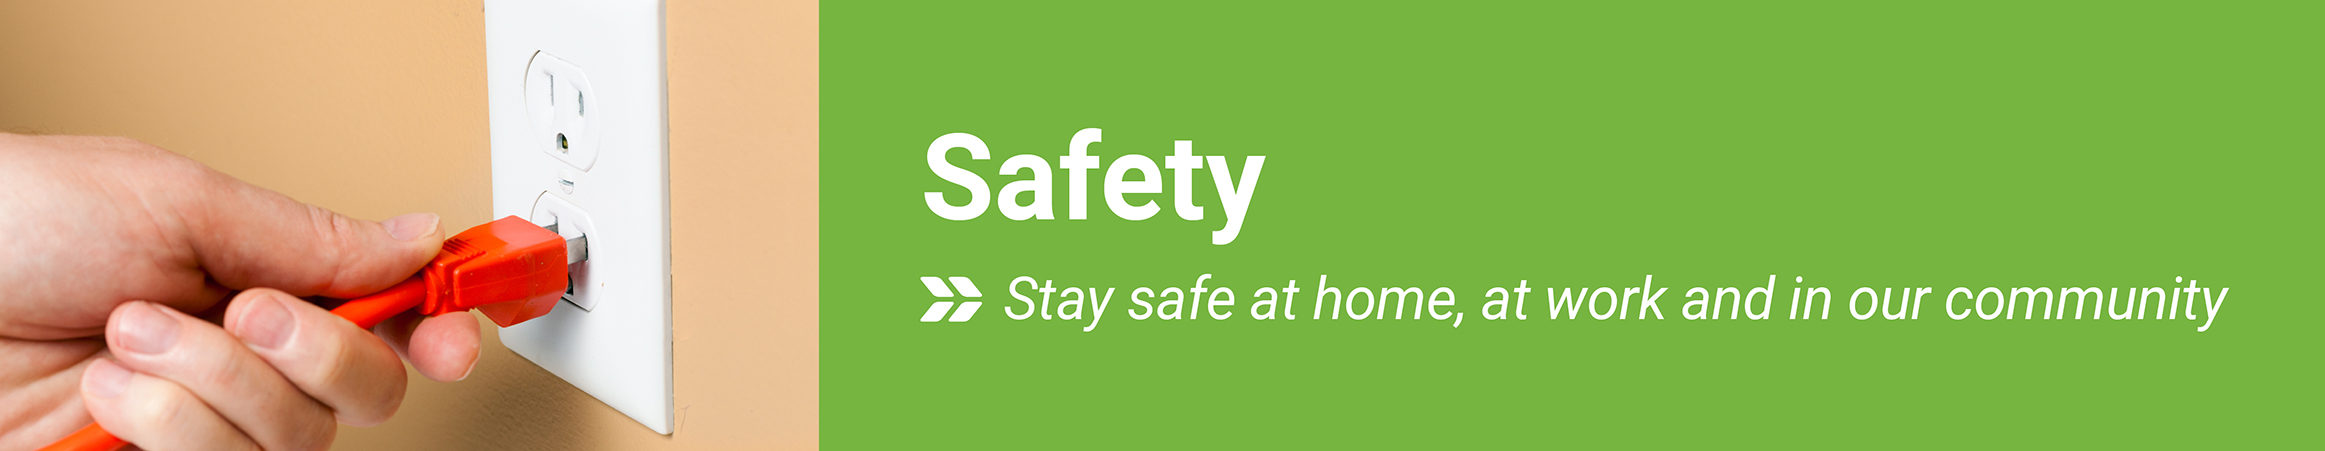 Safety: Stay safe at home, at work and in our community